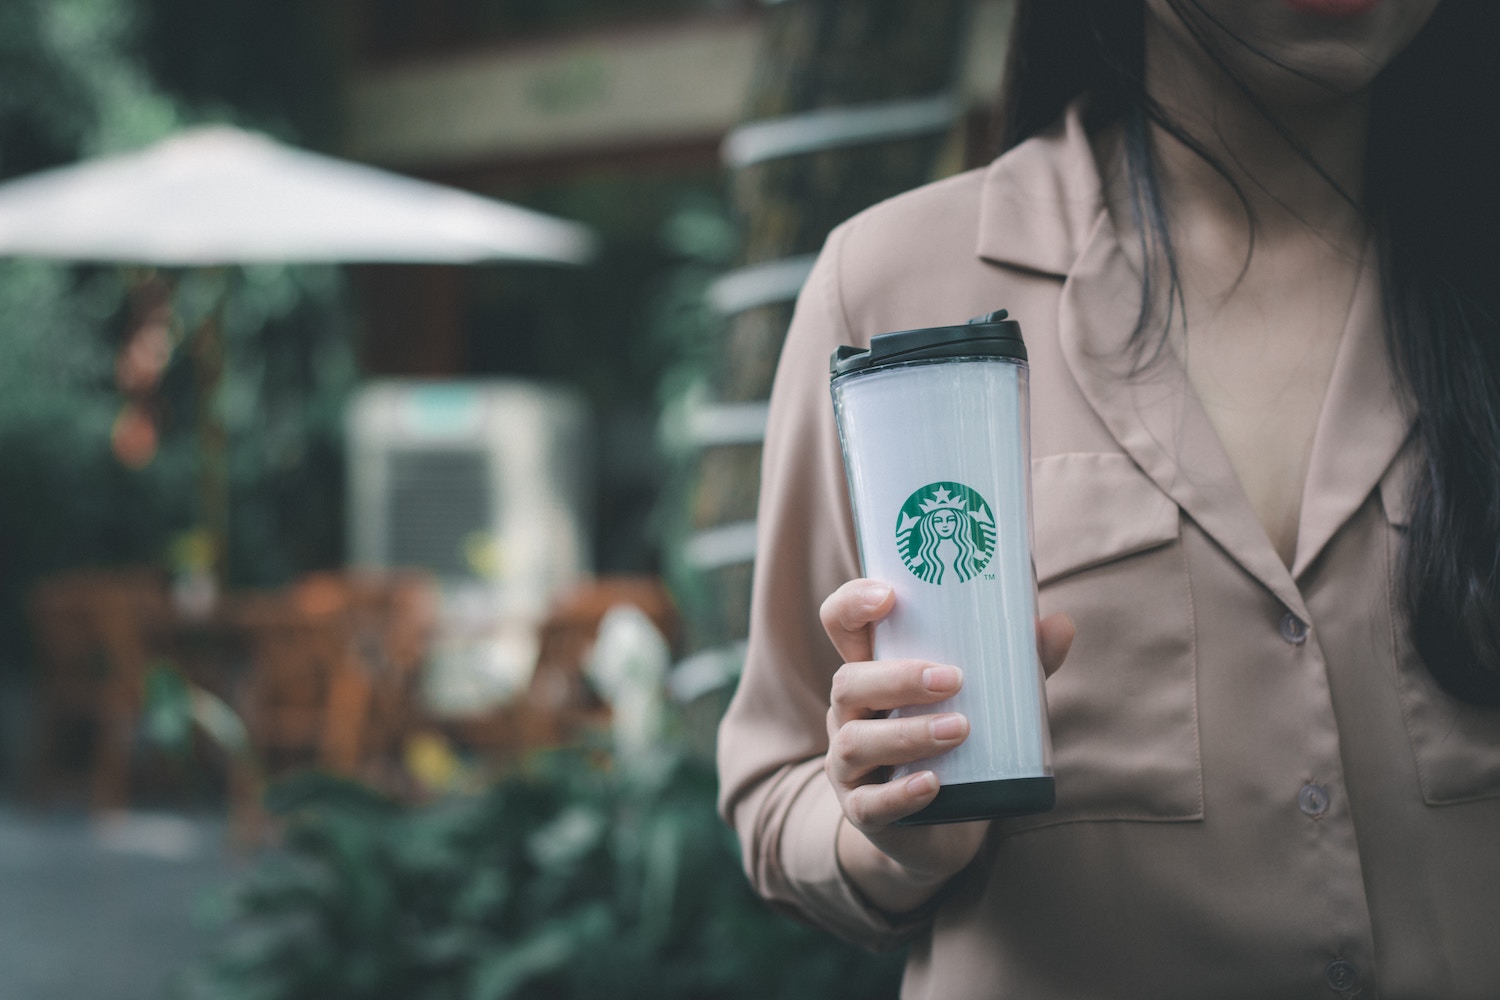 Starbucks China is betting on deliveries with Ele.me to stay ahead